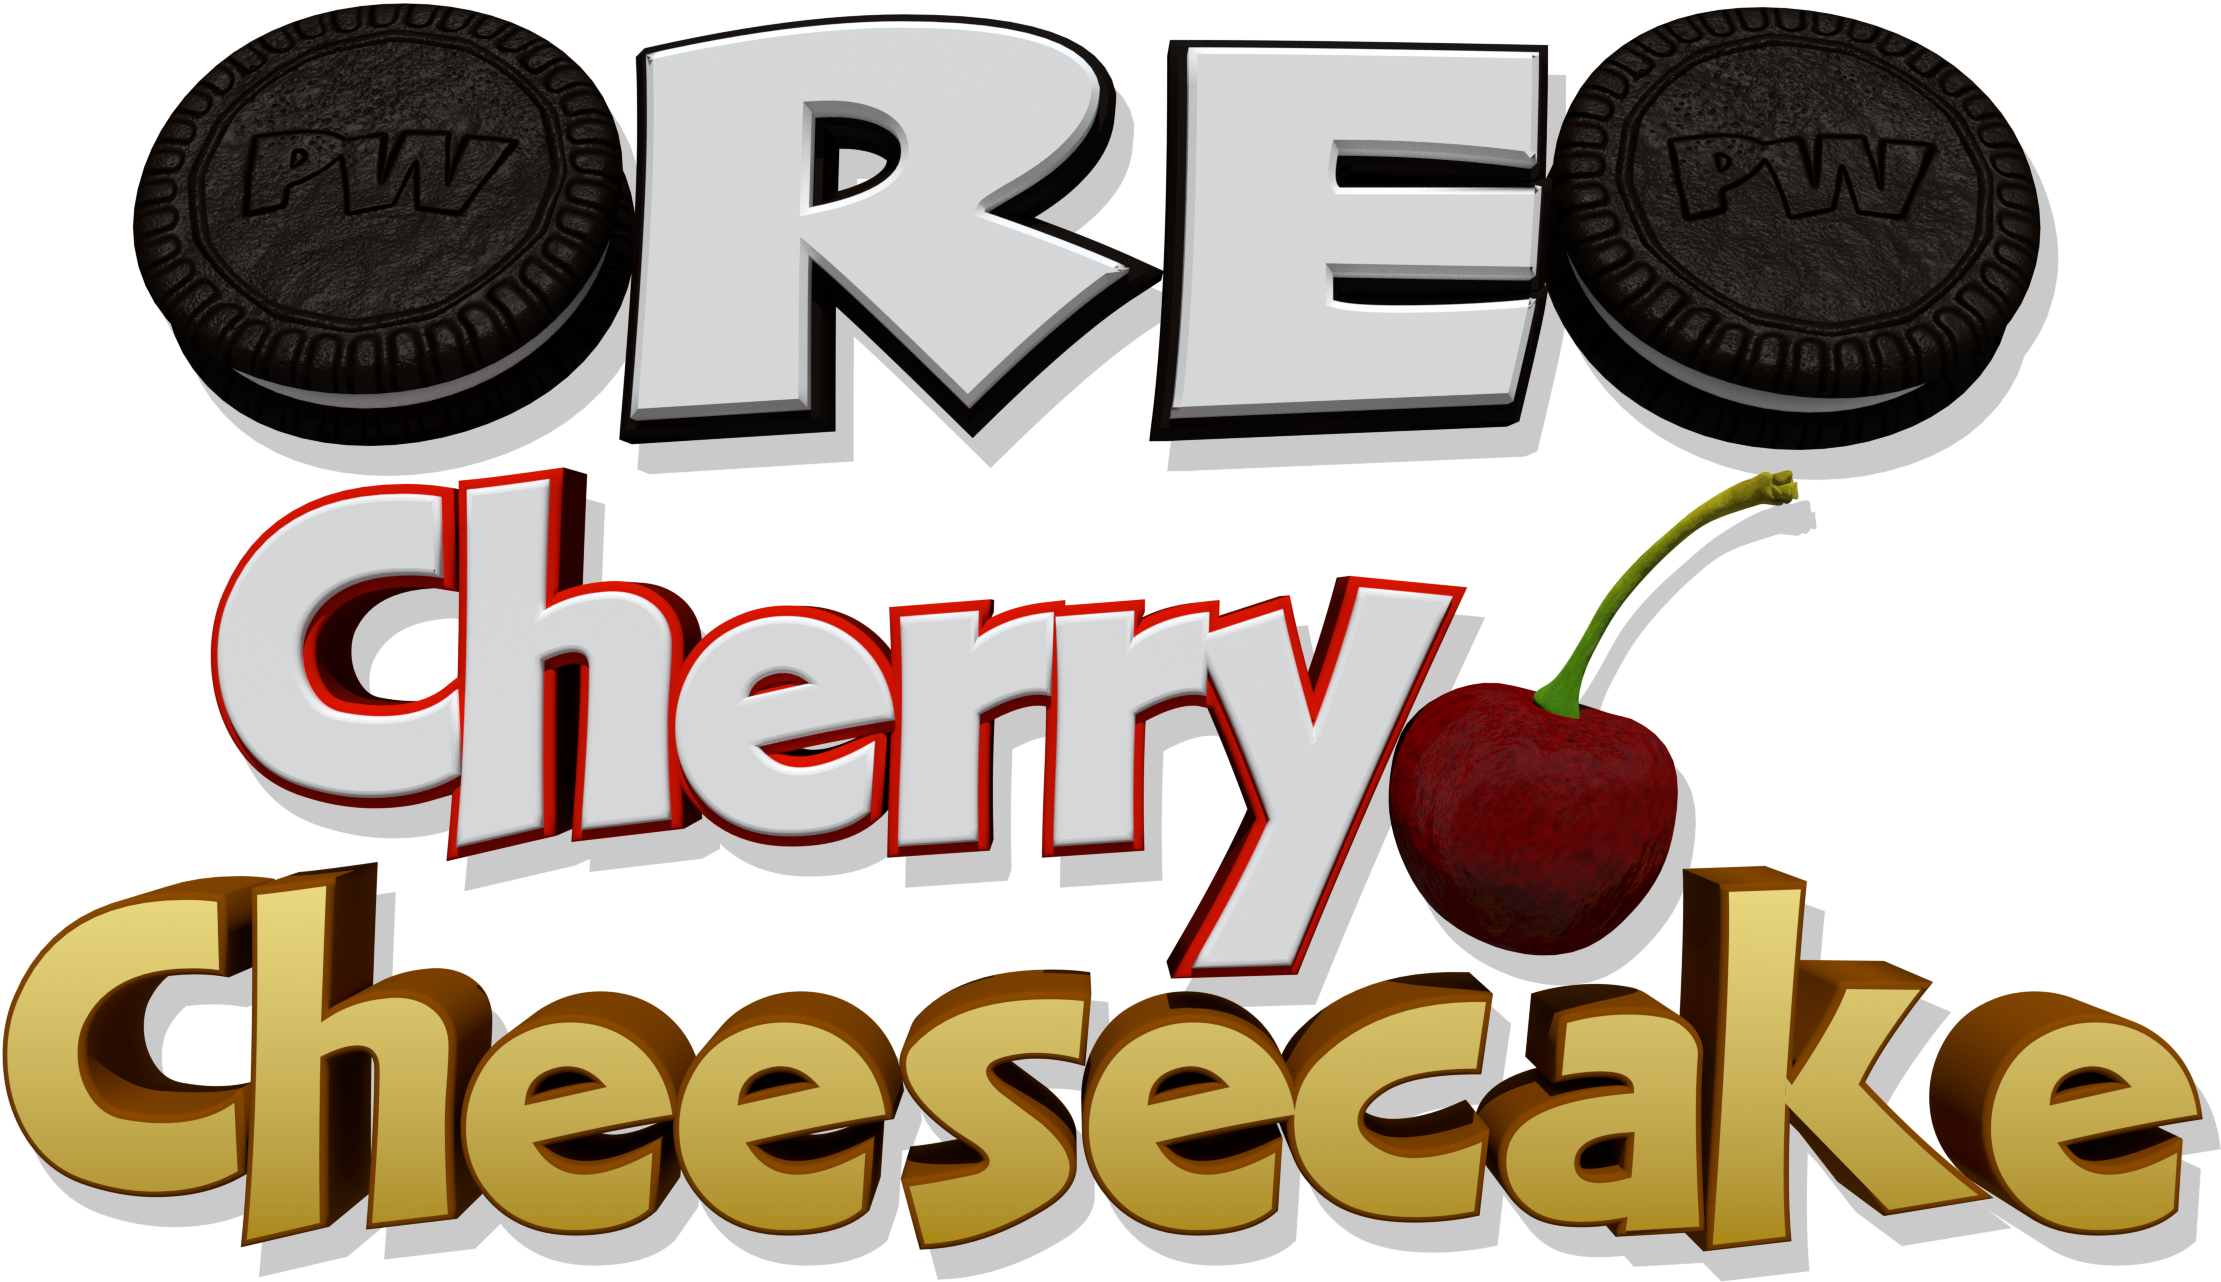 Sale - Cheesecake (2880x1440), Png Download